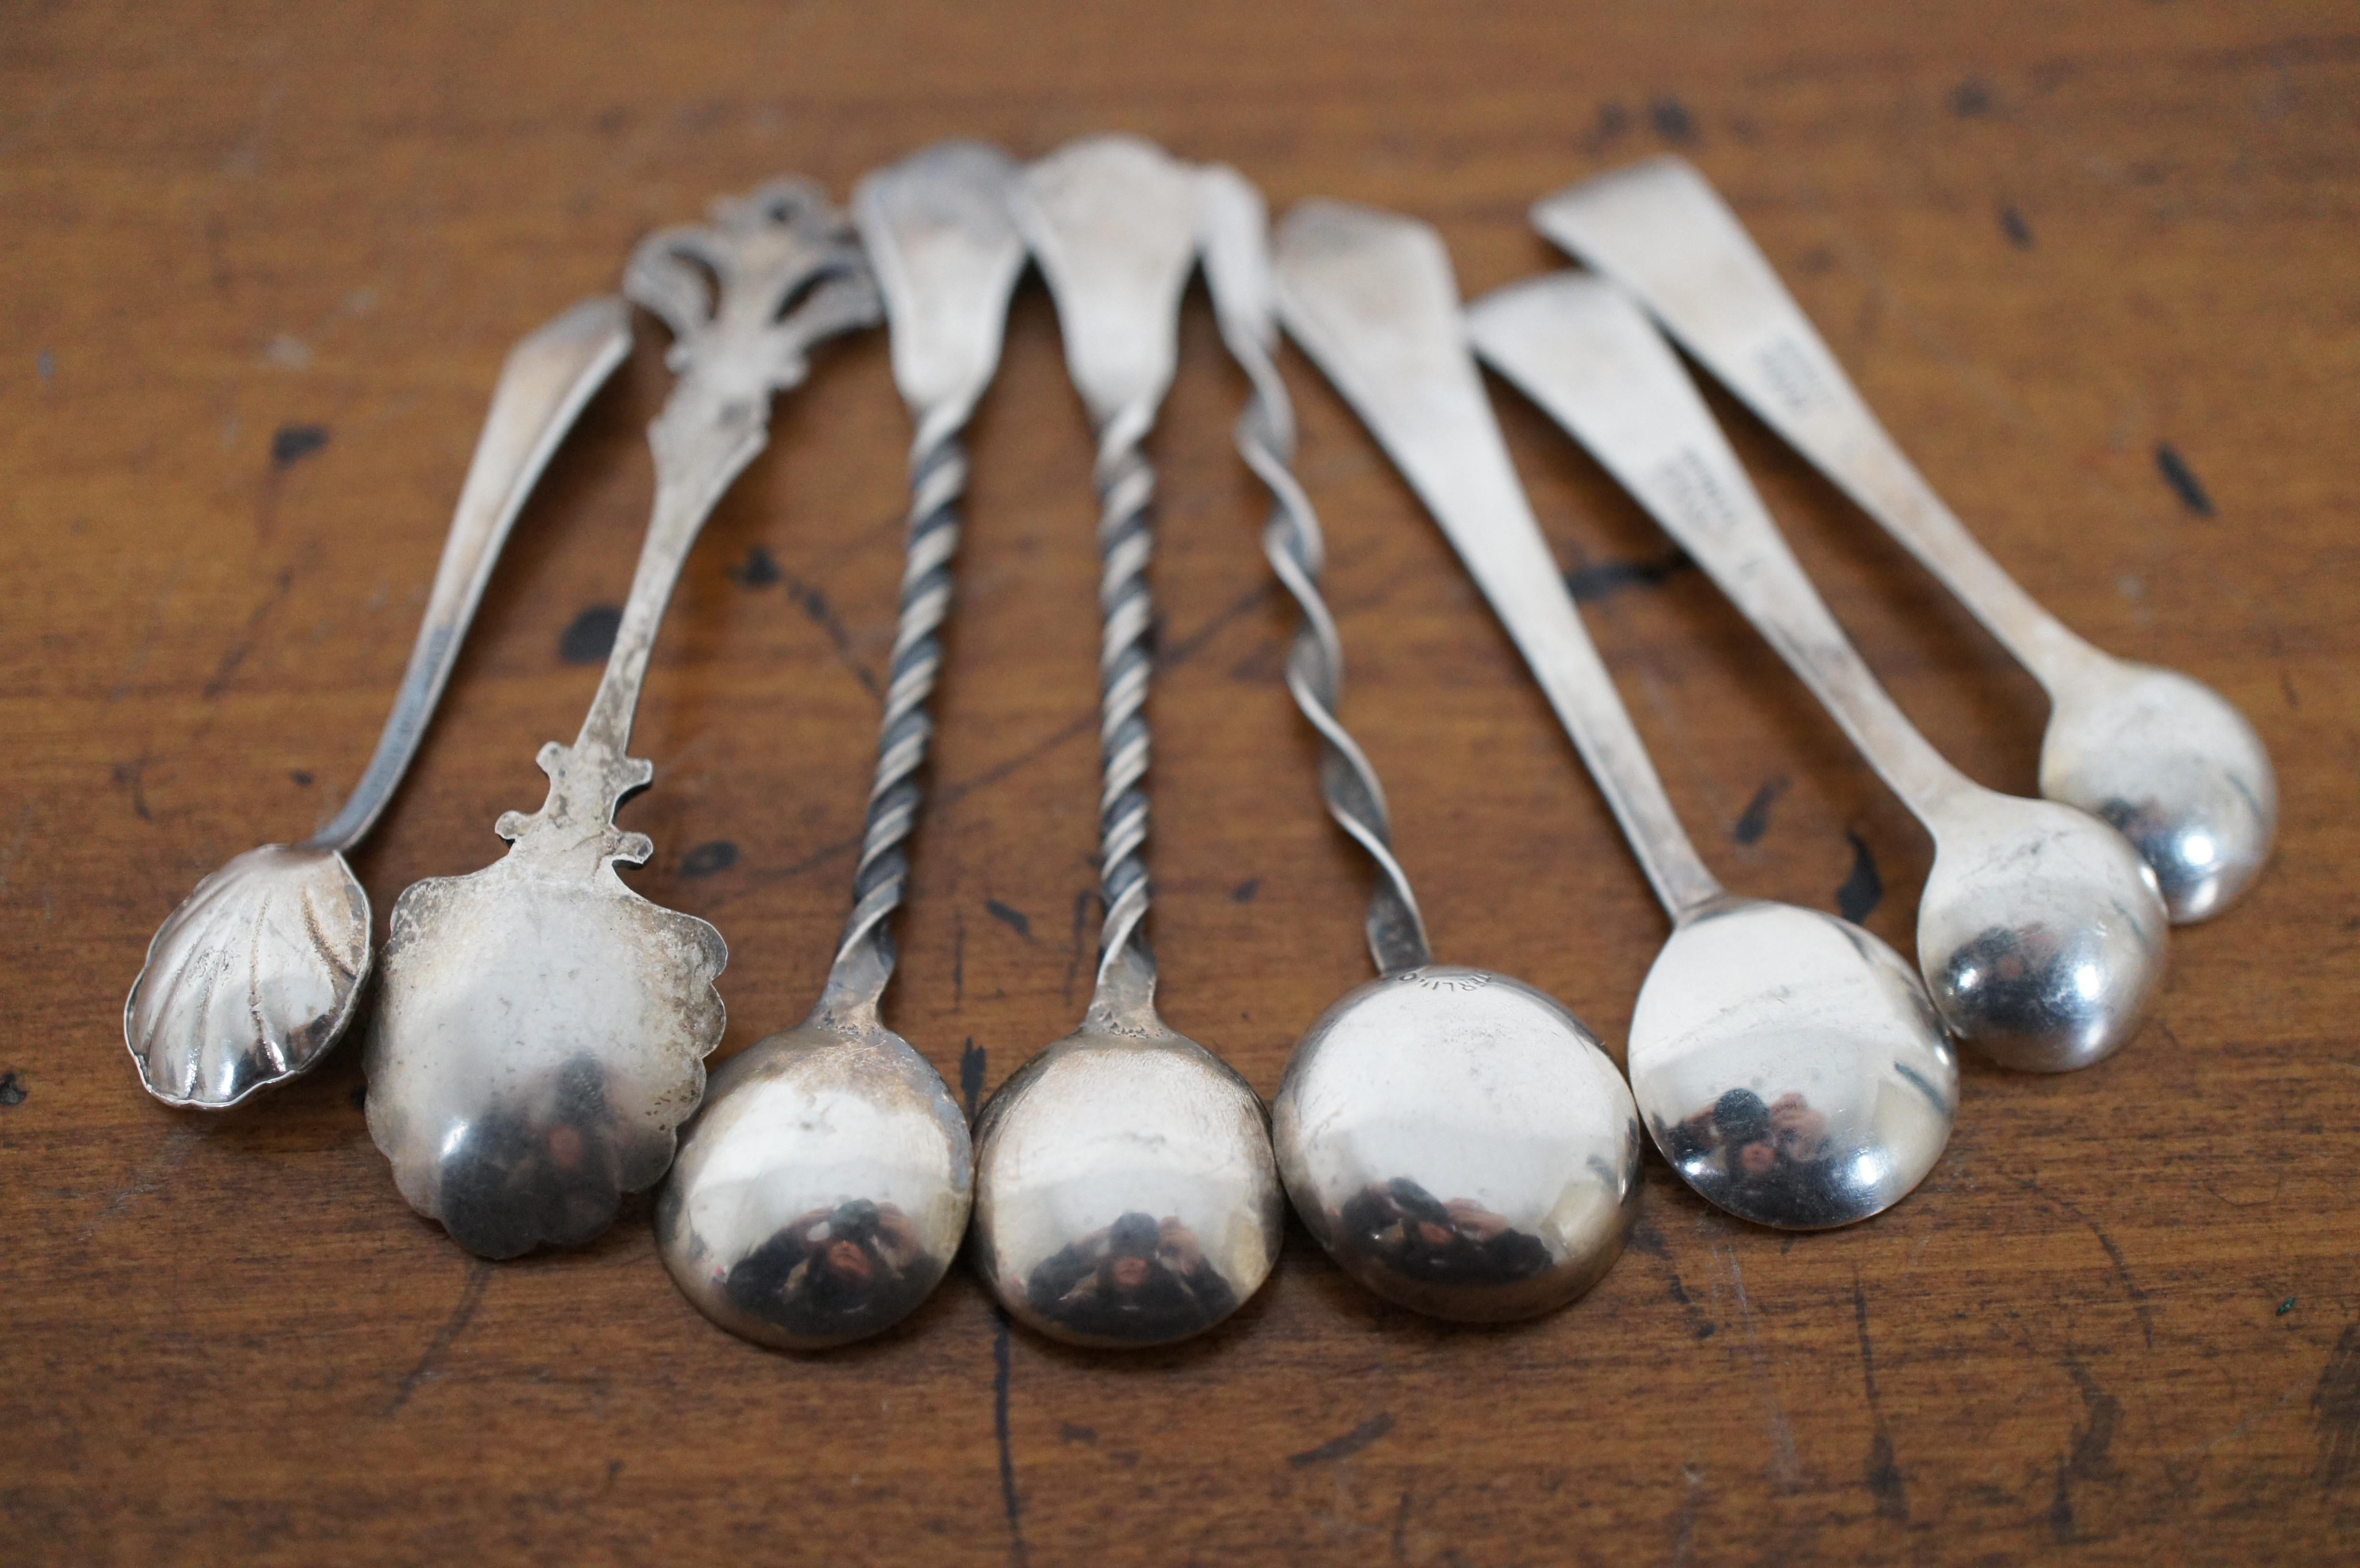 8 Antique Assorted Twisted Sterling Silver Salt Mustard Spoons 25g 1